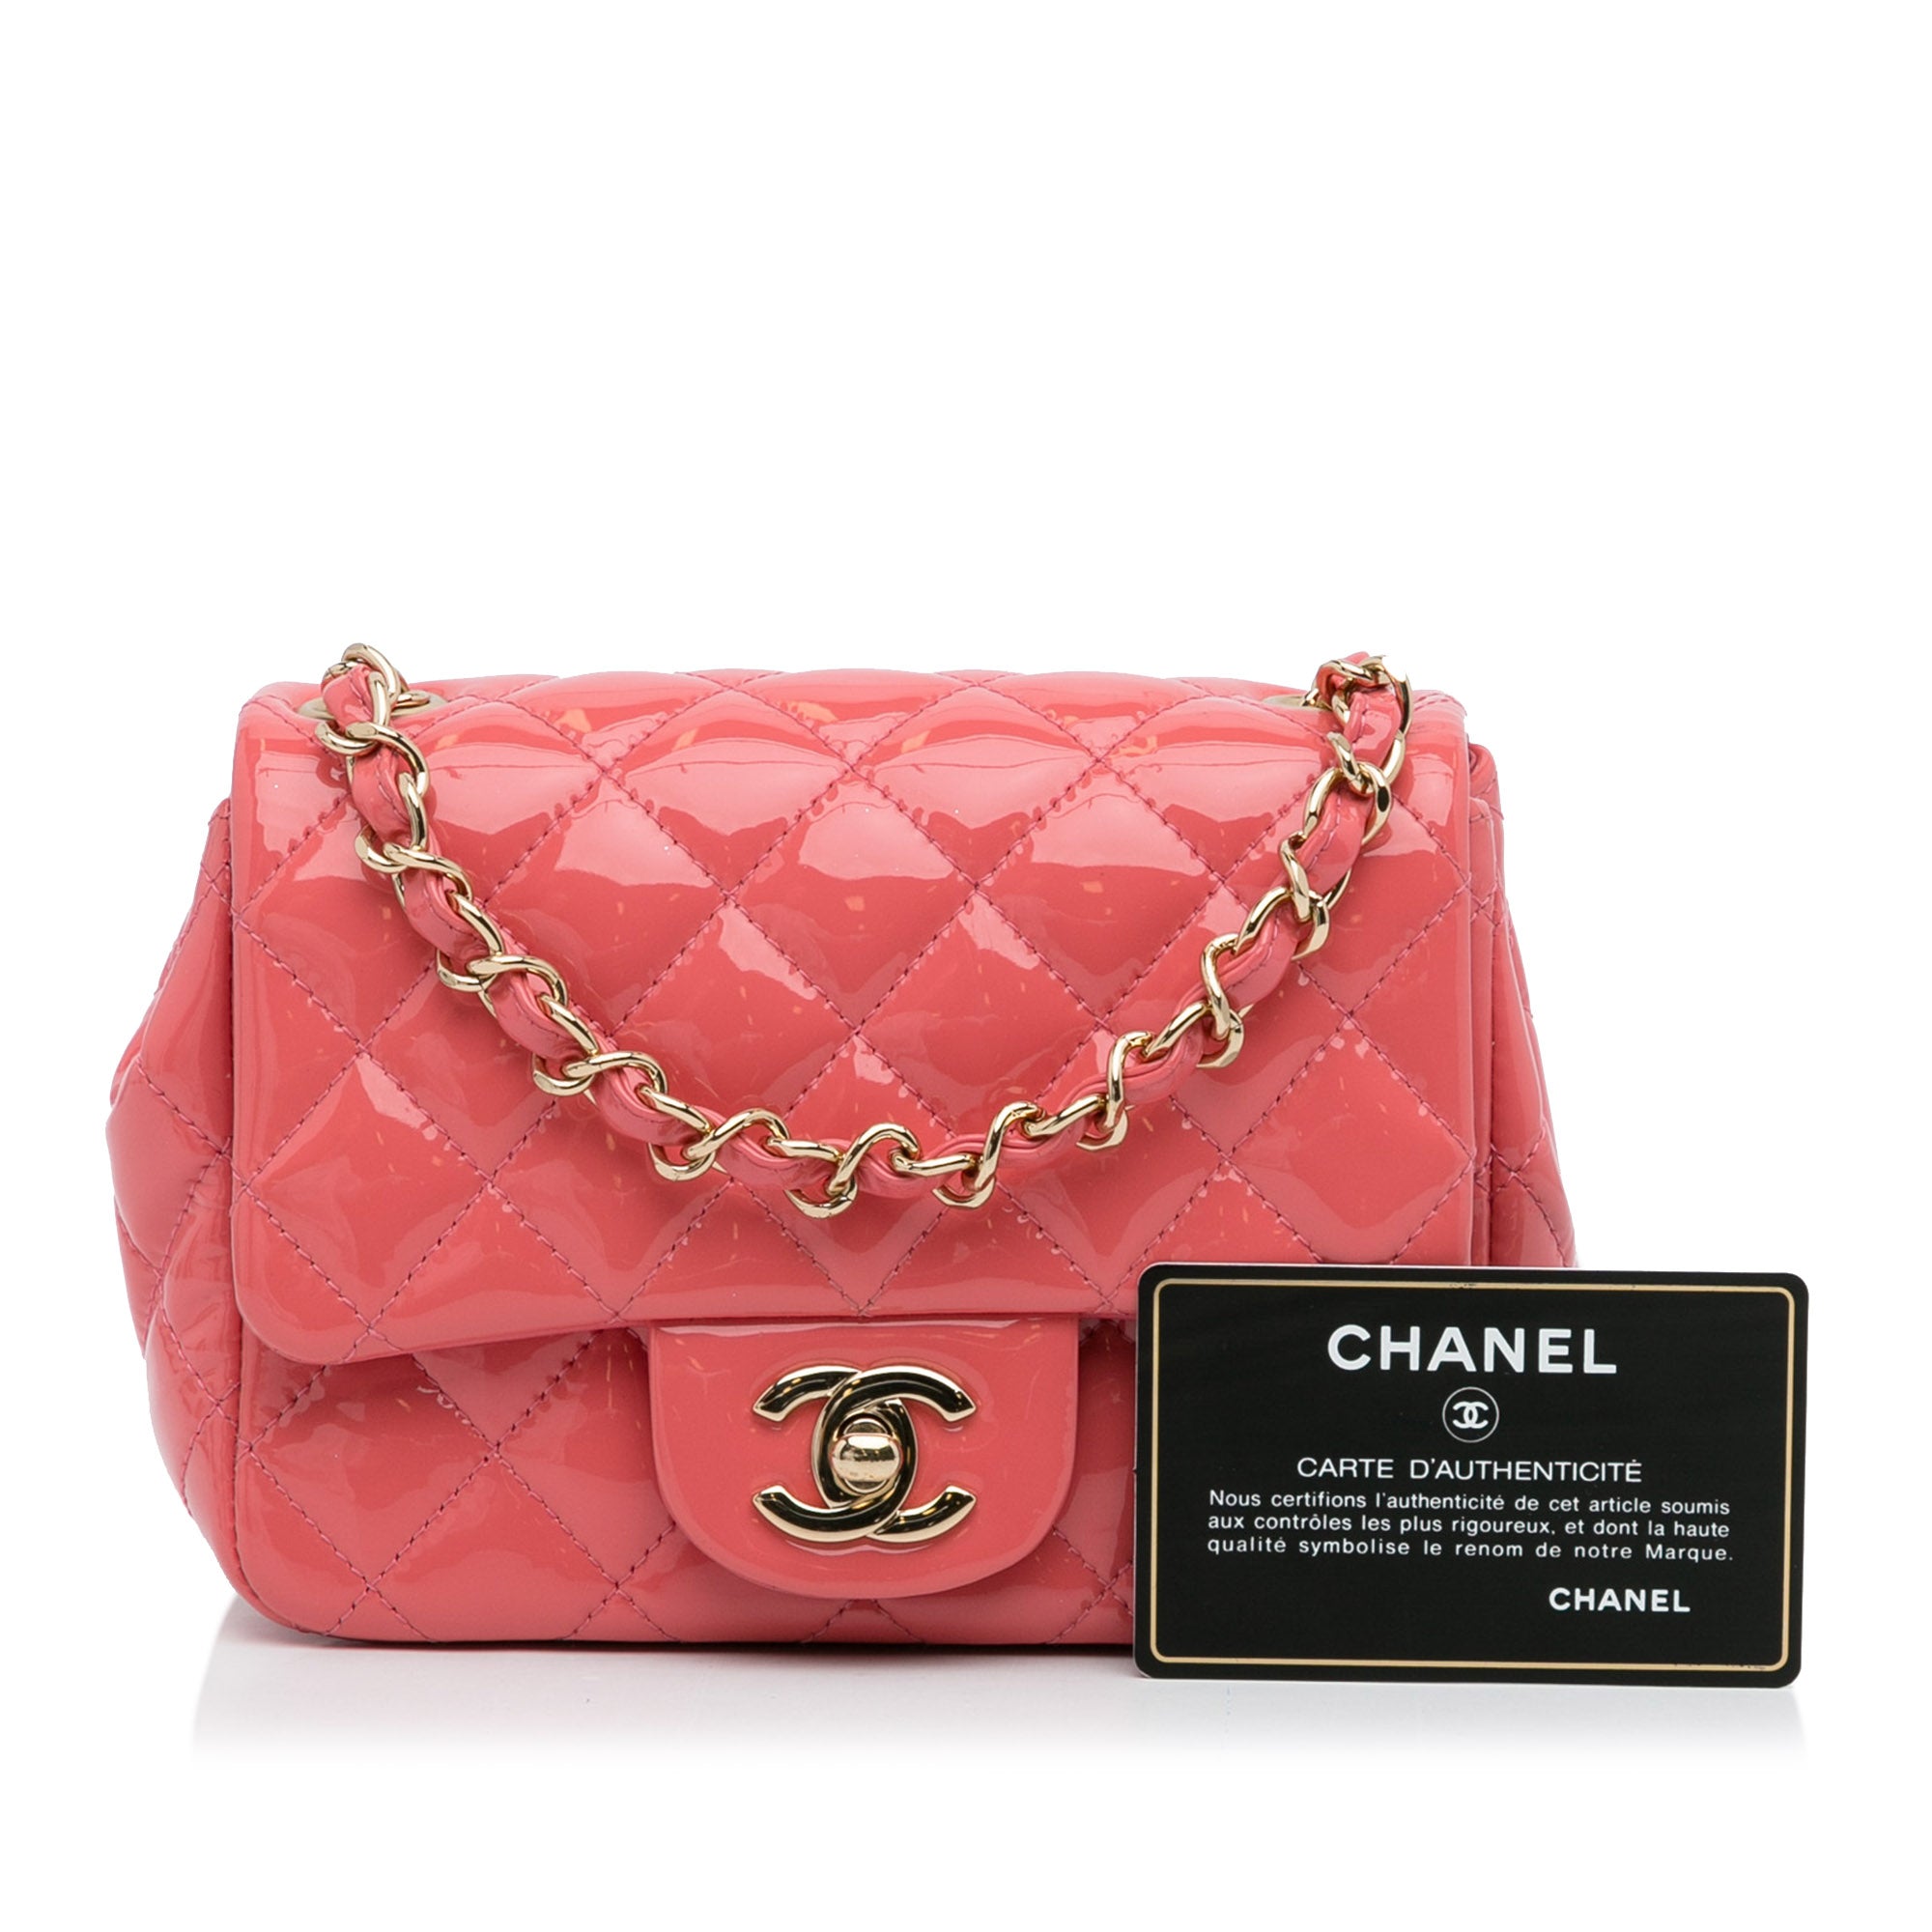 CHANEL Statement Mini Flap Quilted Chevron Leather Crossbody Bag Camel